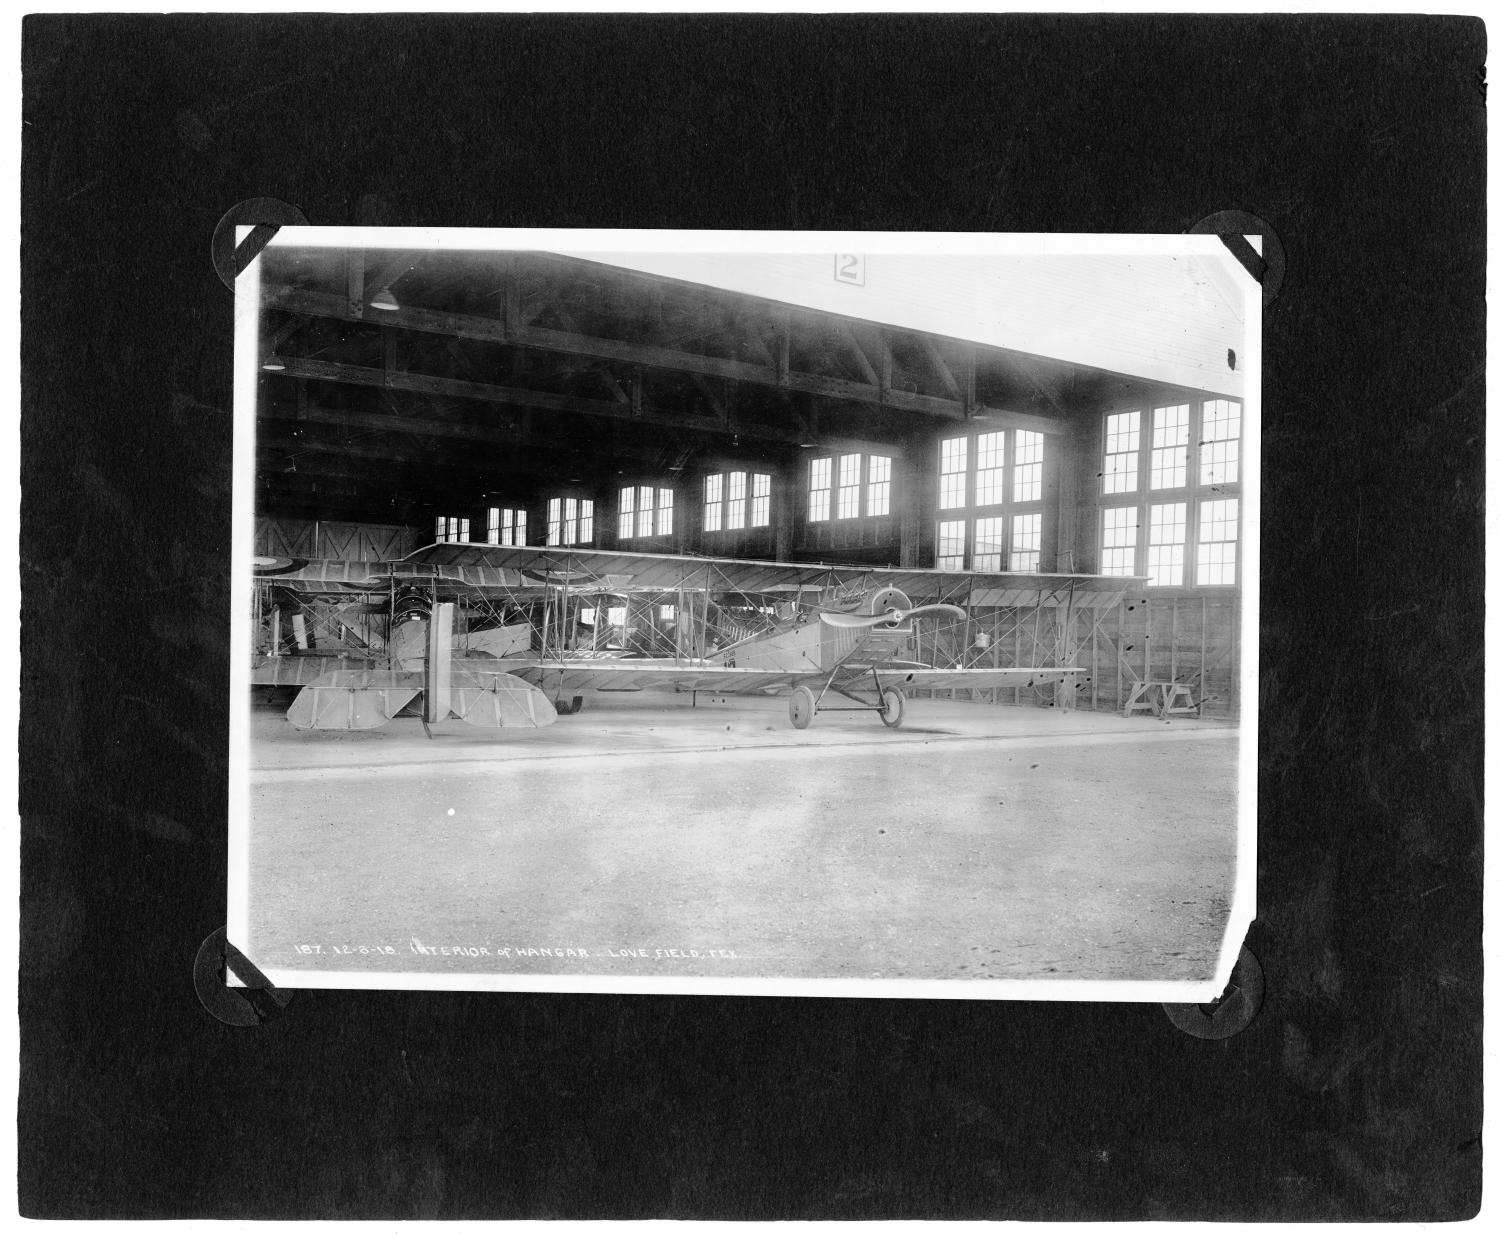 [Biplane and Interior of Hangar]
                                                
                                                    [Sequence #]: 1 of 1
                                                